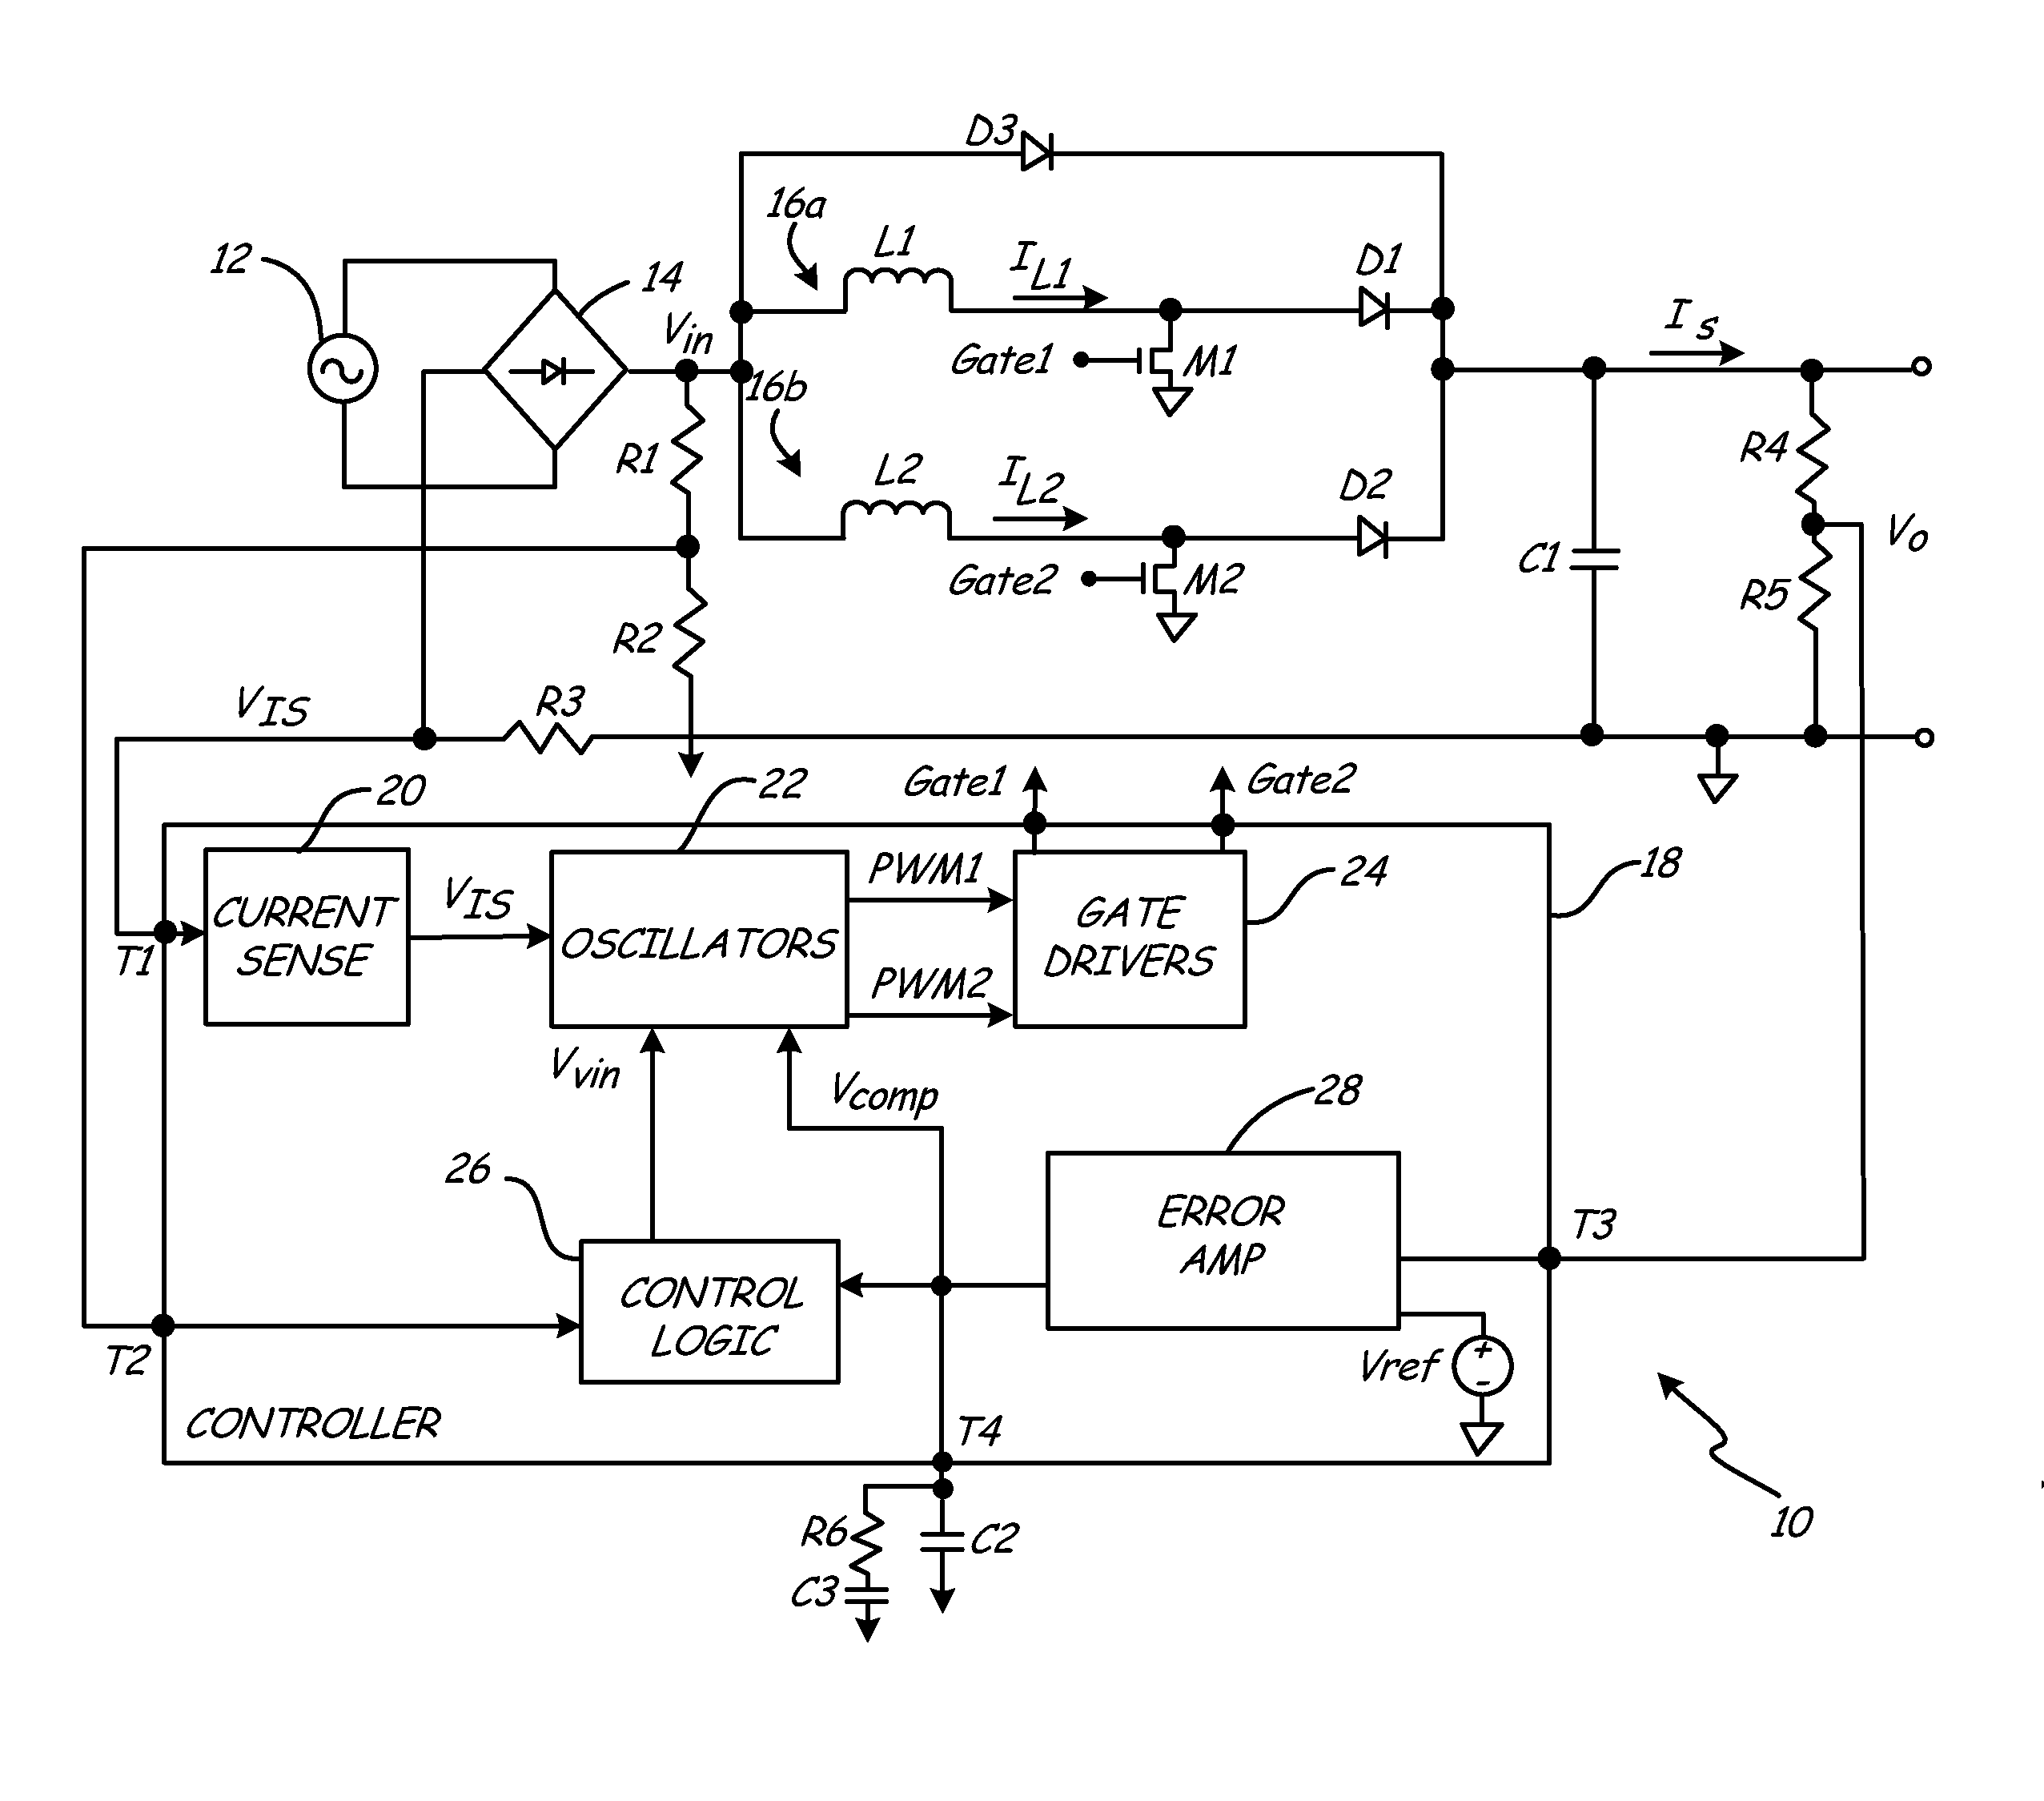 Time-limiting mode (TLM) for an interleaved power factor correction (PFC) converter